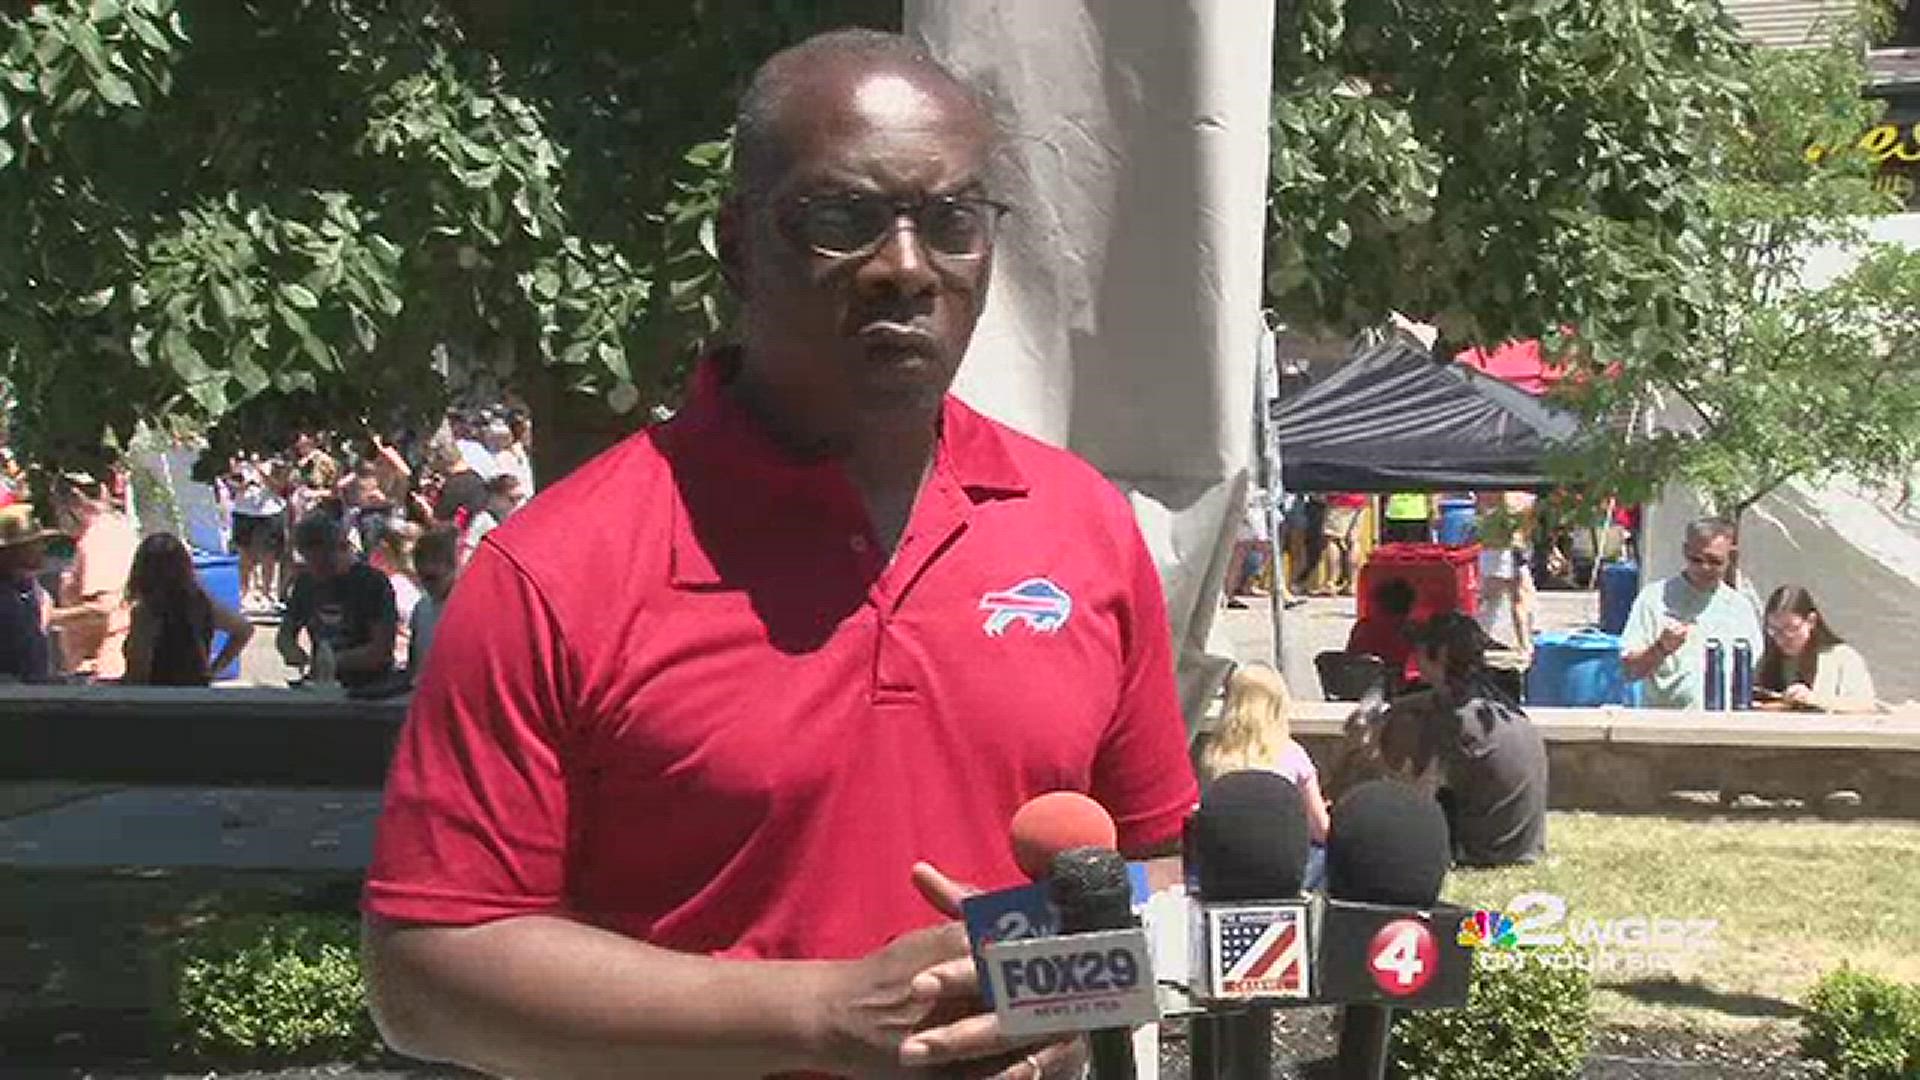 The mayor held a news conference on Sunday at Niagara Square, during the Taste of Buffalo, before leaving for Washington to meet with President Biden.